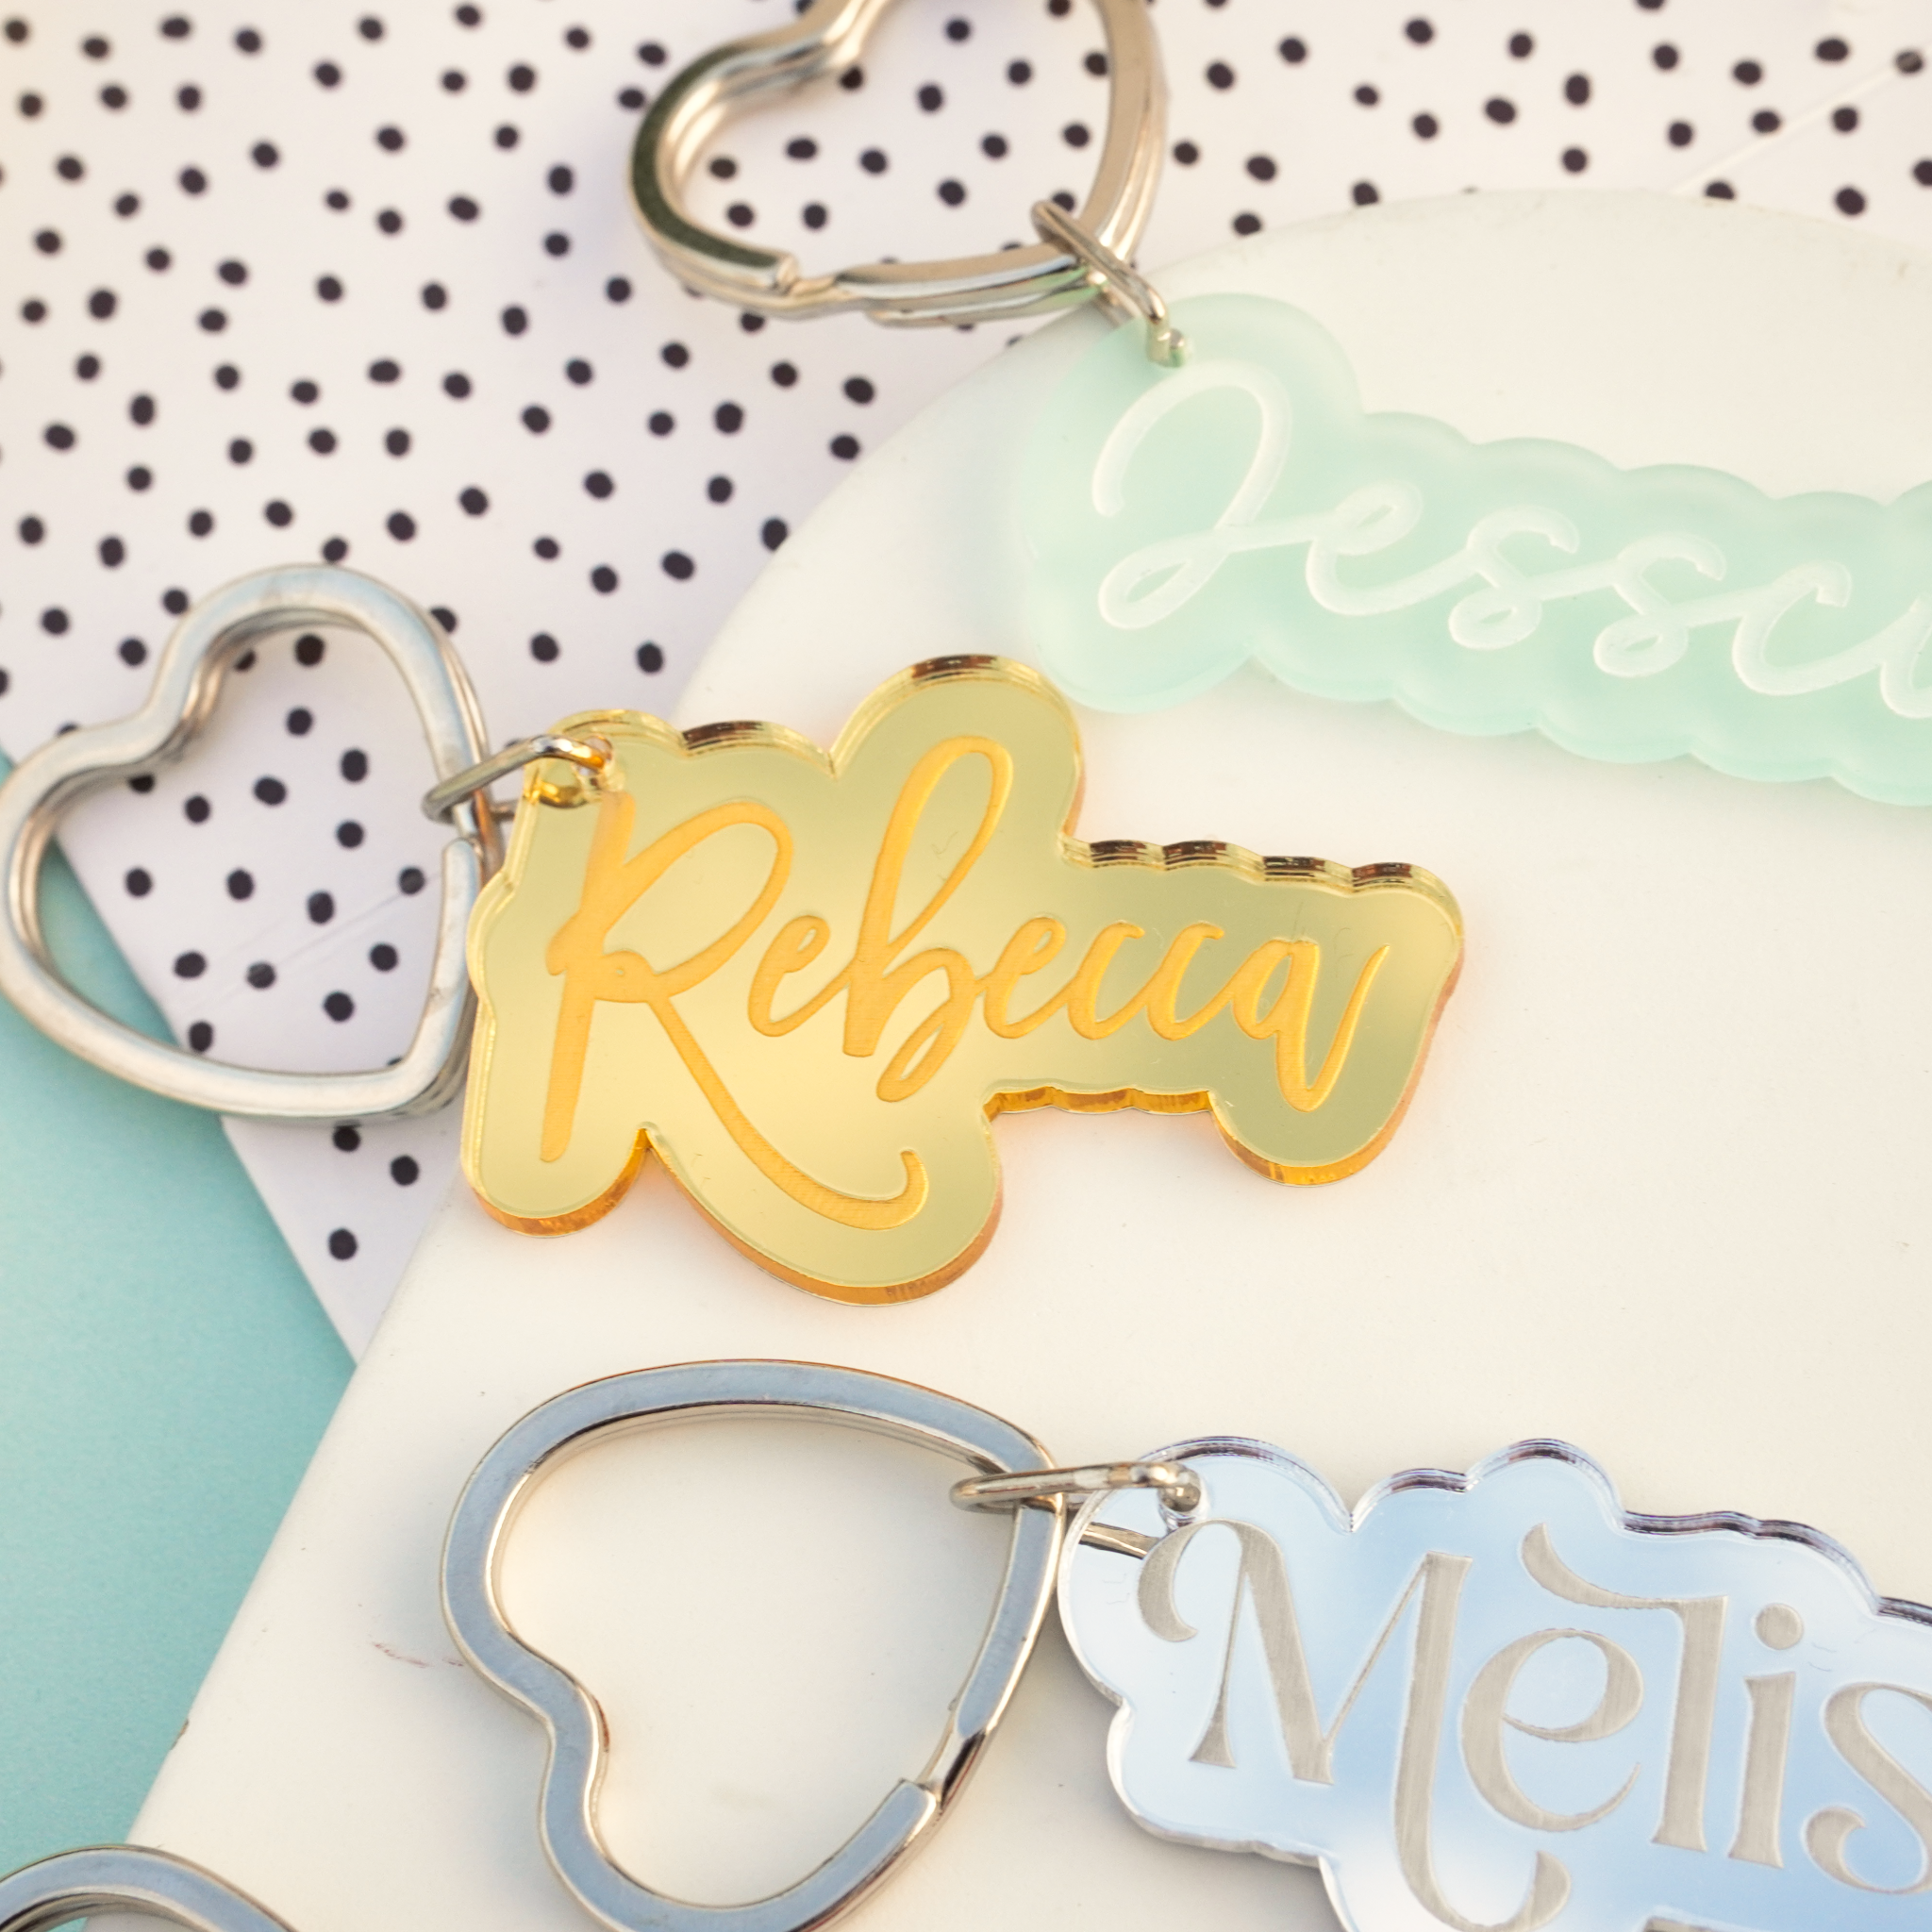 acrylic key chain personalised with name for women gift